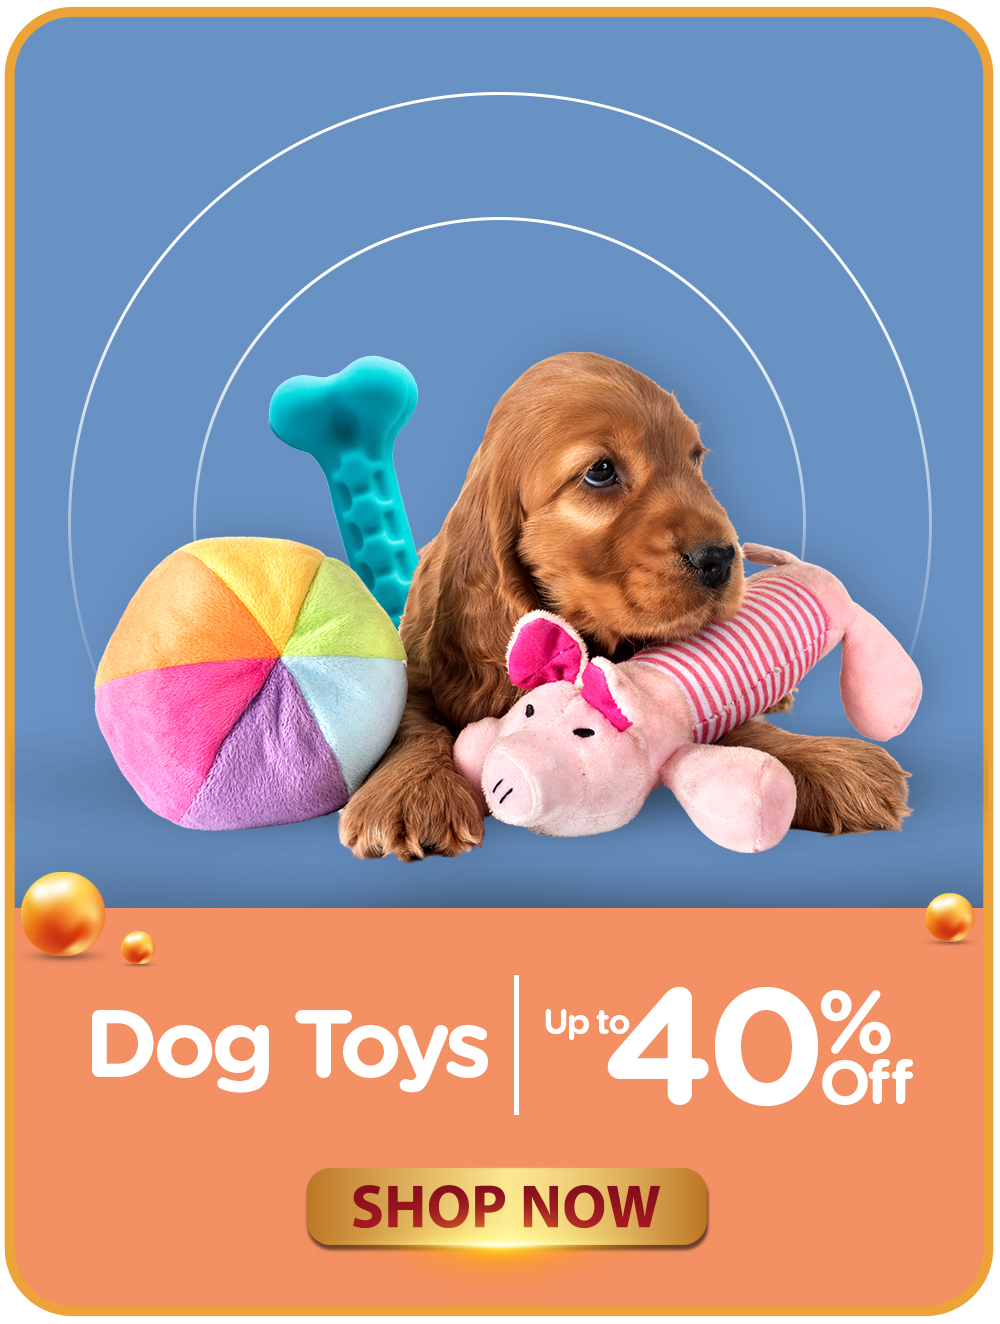 06 - CATEGORY BANNERS - DOG TOYS VER2